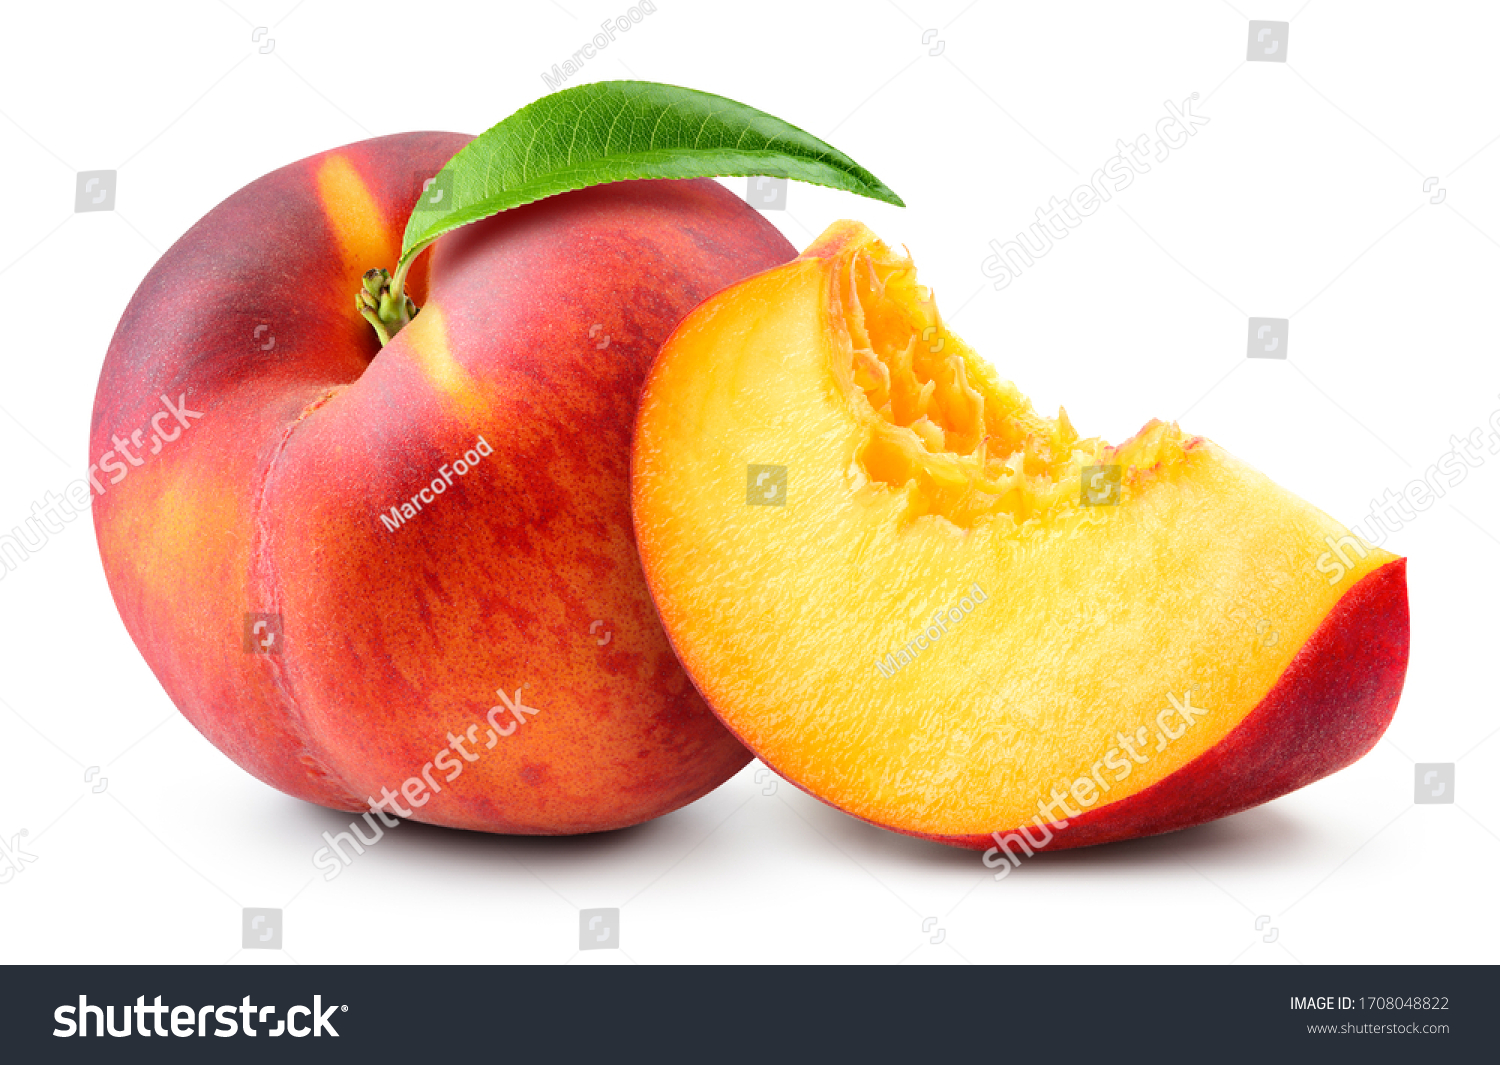 Peach with slice on white background. Peach isolate. Full depth of field. With clipping path. #1708048822